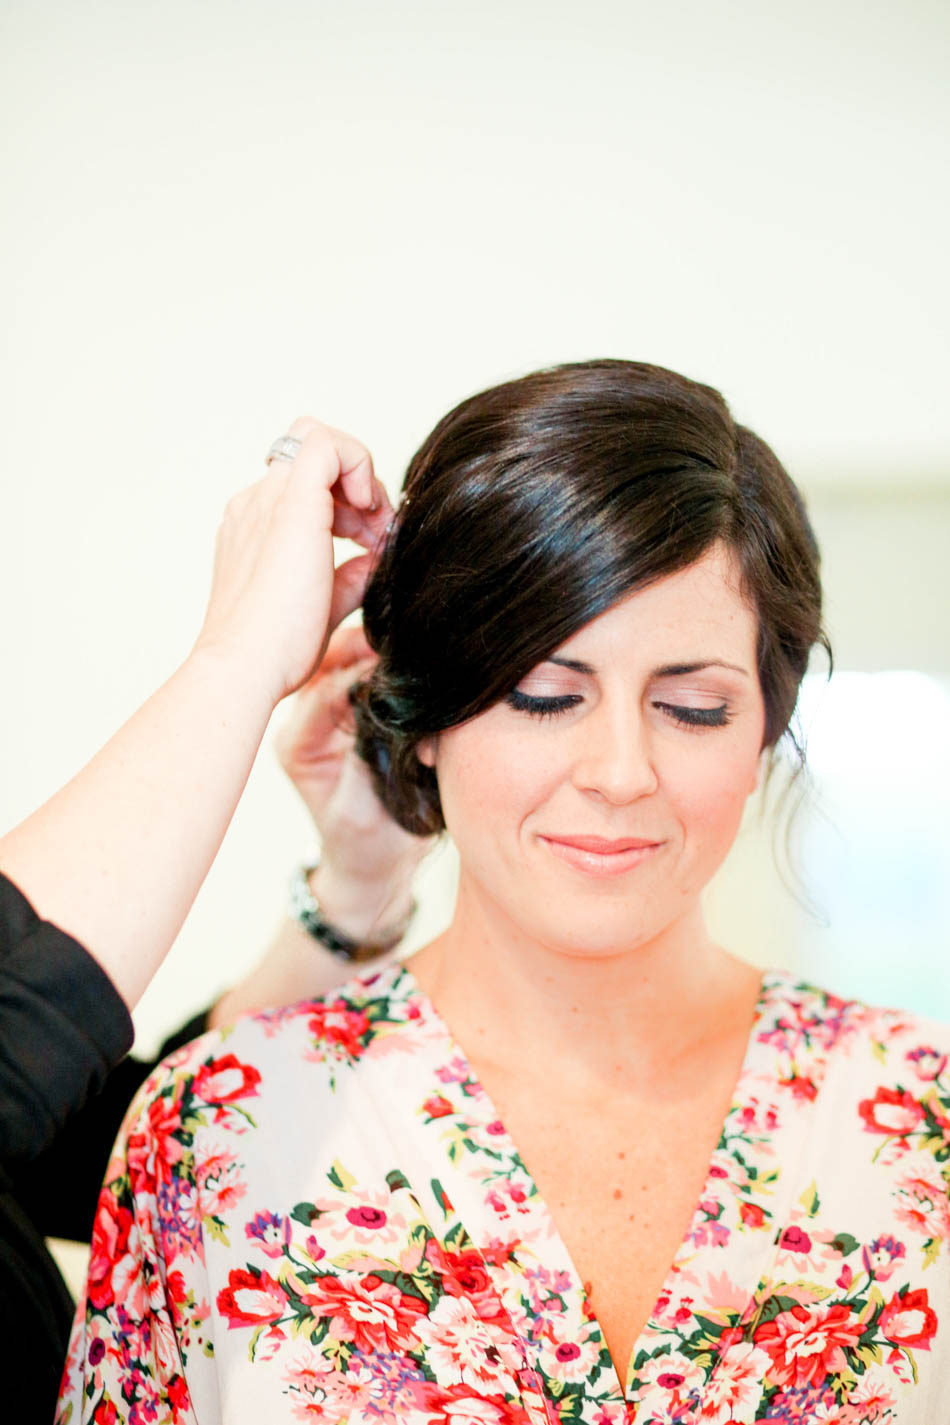 Bride gets hair styled, I'ON Creek Club, Mt Pleasant, South Carolina Kate Timbers Photography. http://katetimbers.com #katetimbersphotography // Charleston Photography // Inspiration